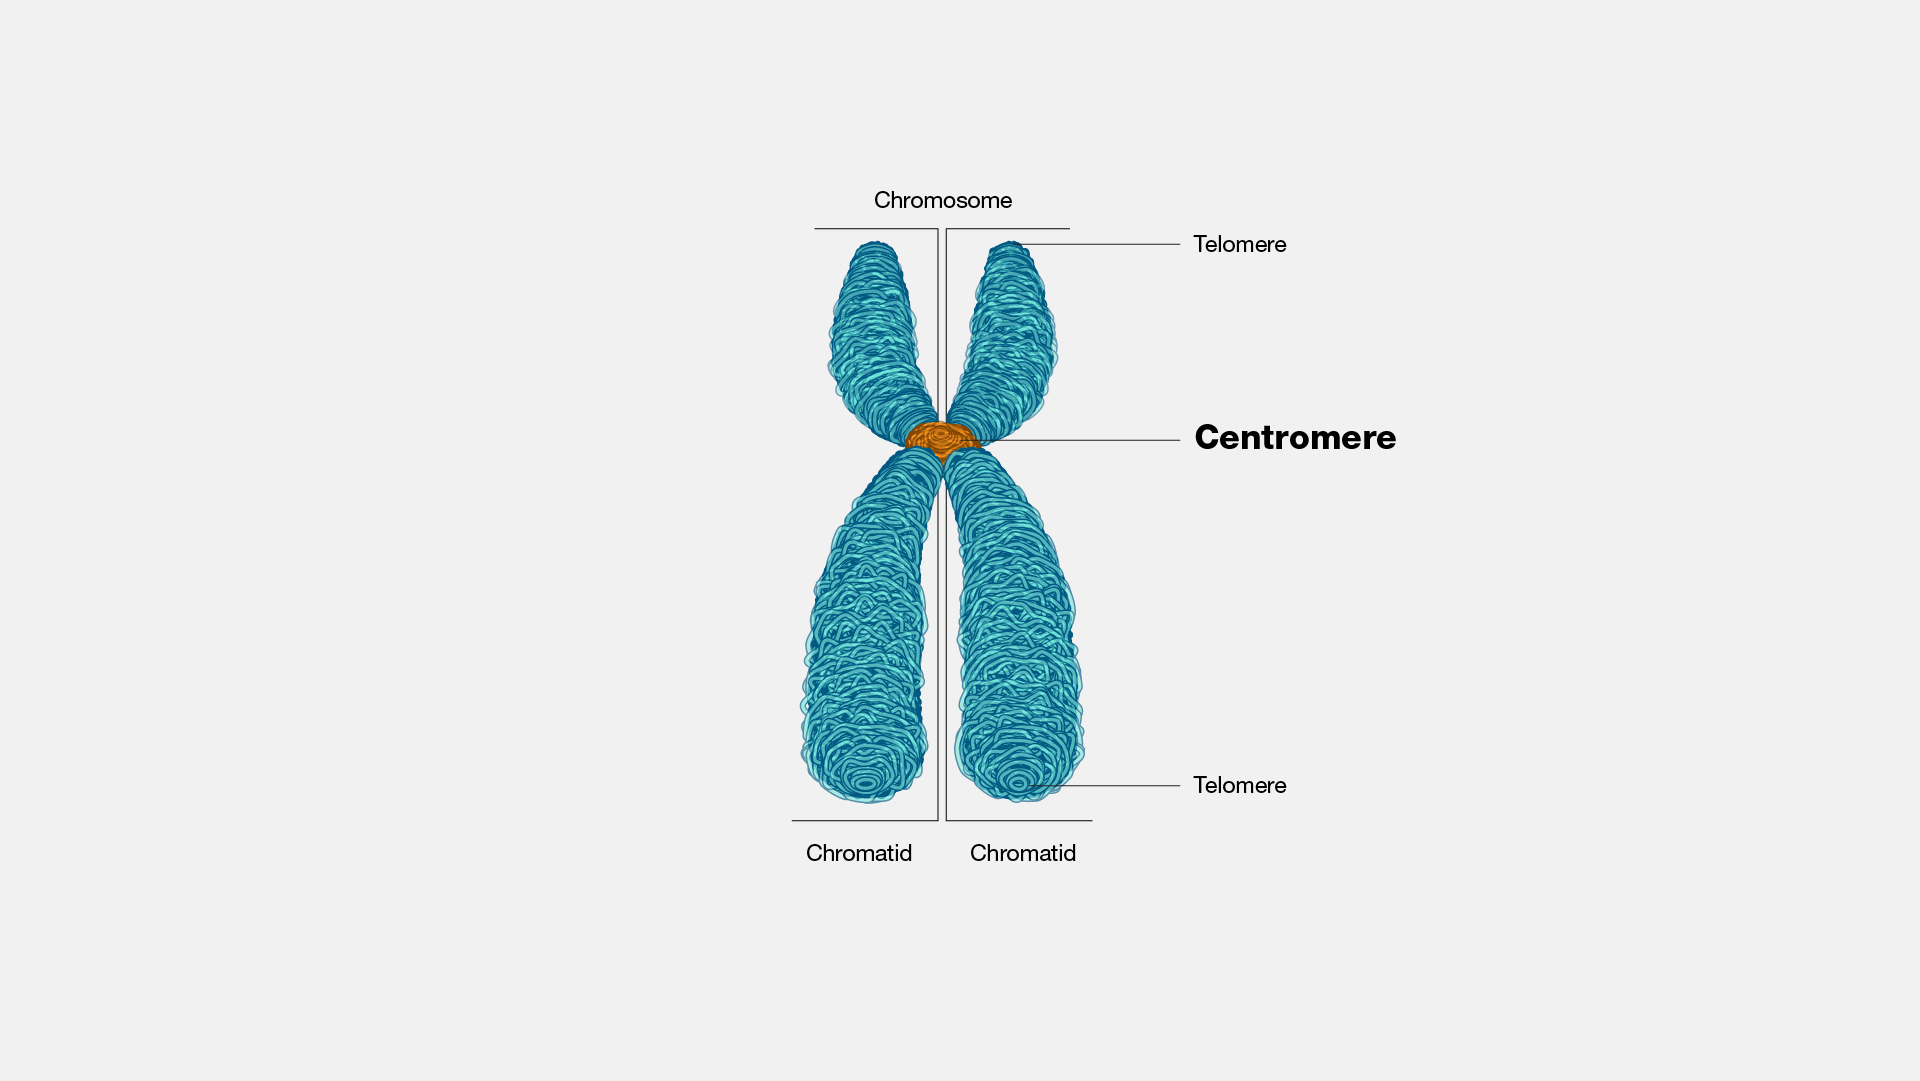 Centromere and Telomere